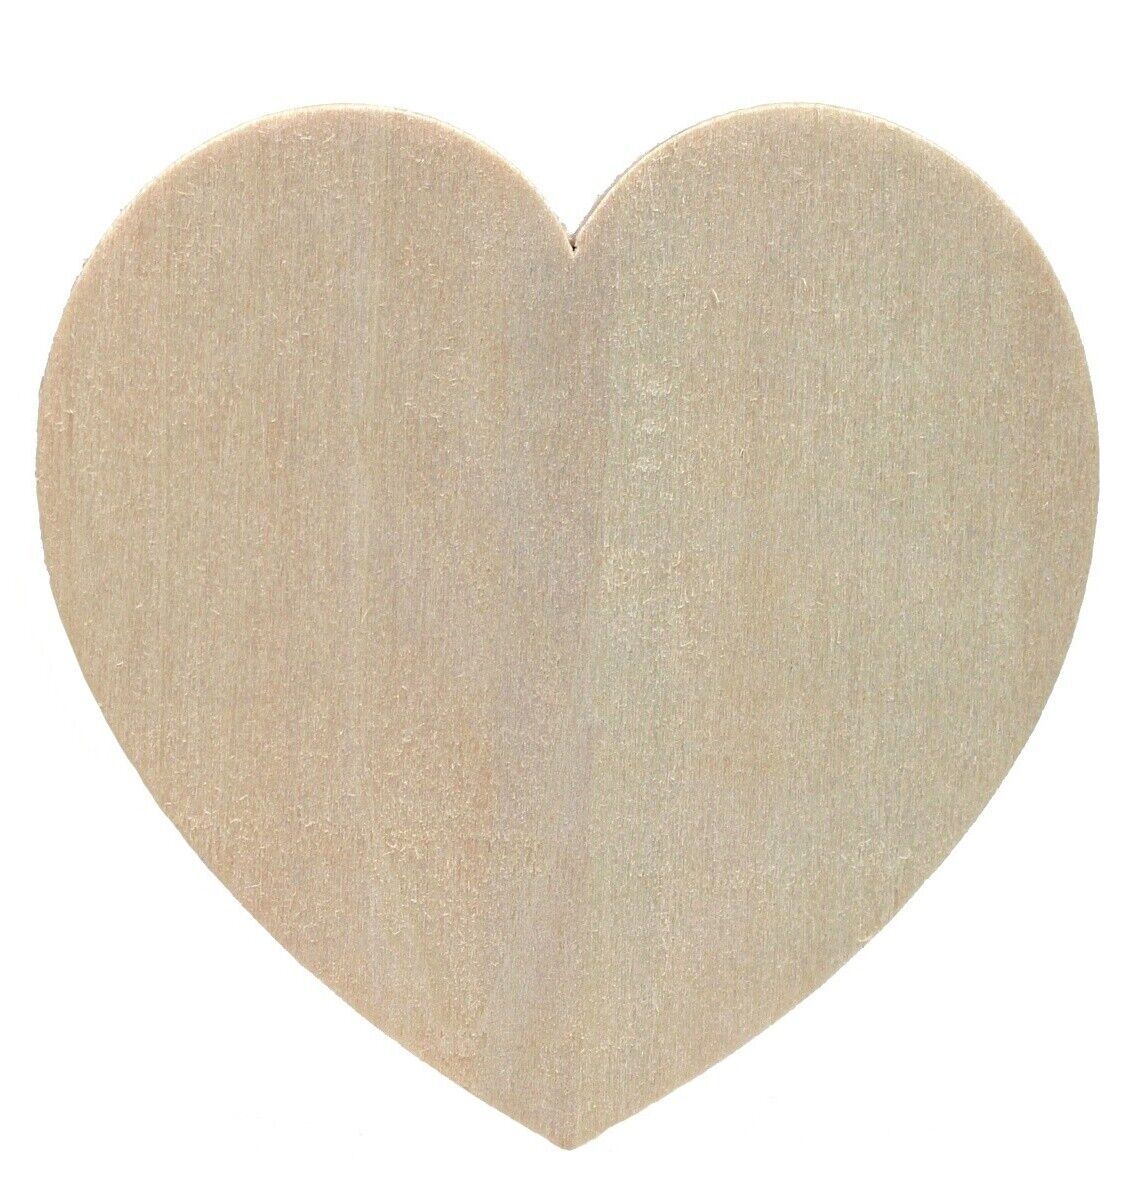 Wood Heart Shape Cutouts for Crafts.